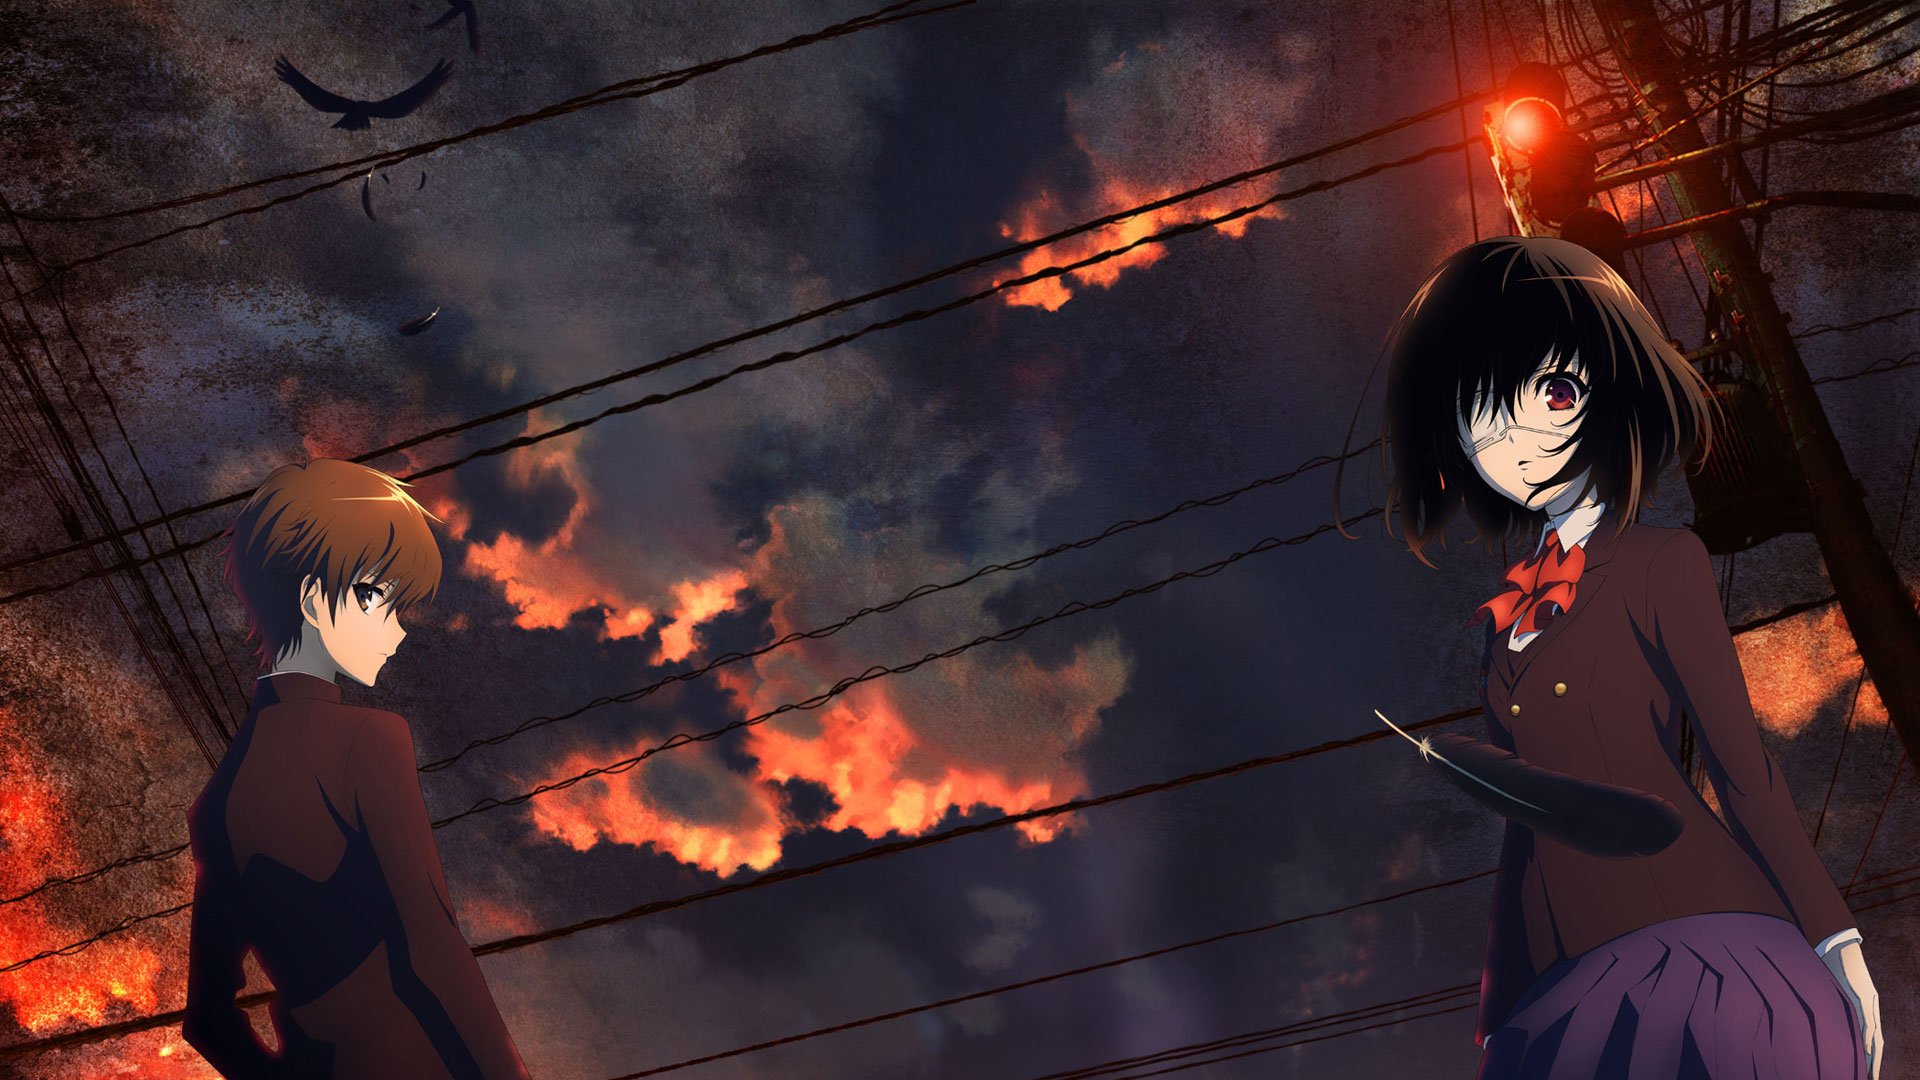 Another Anime Television Series Best HD Wallpaper.